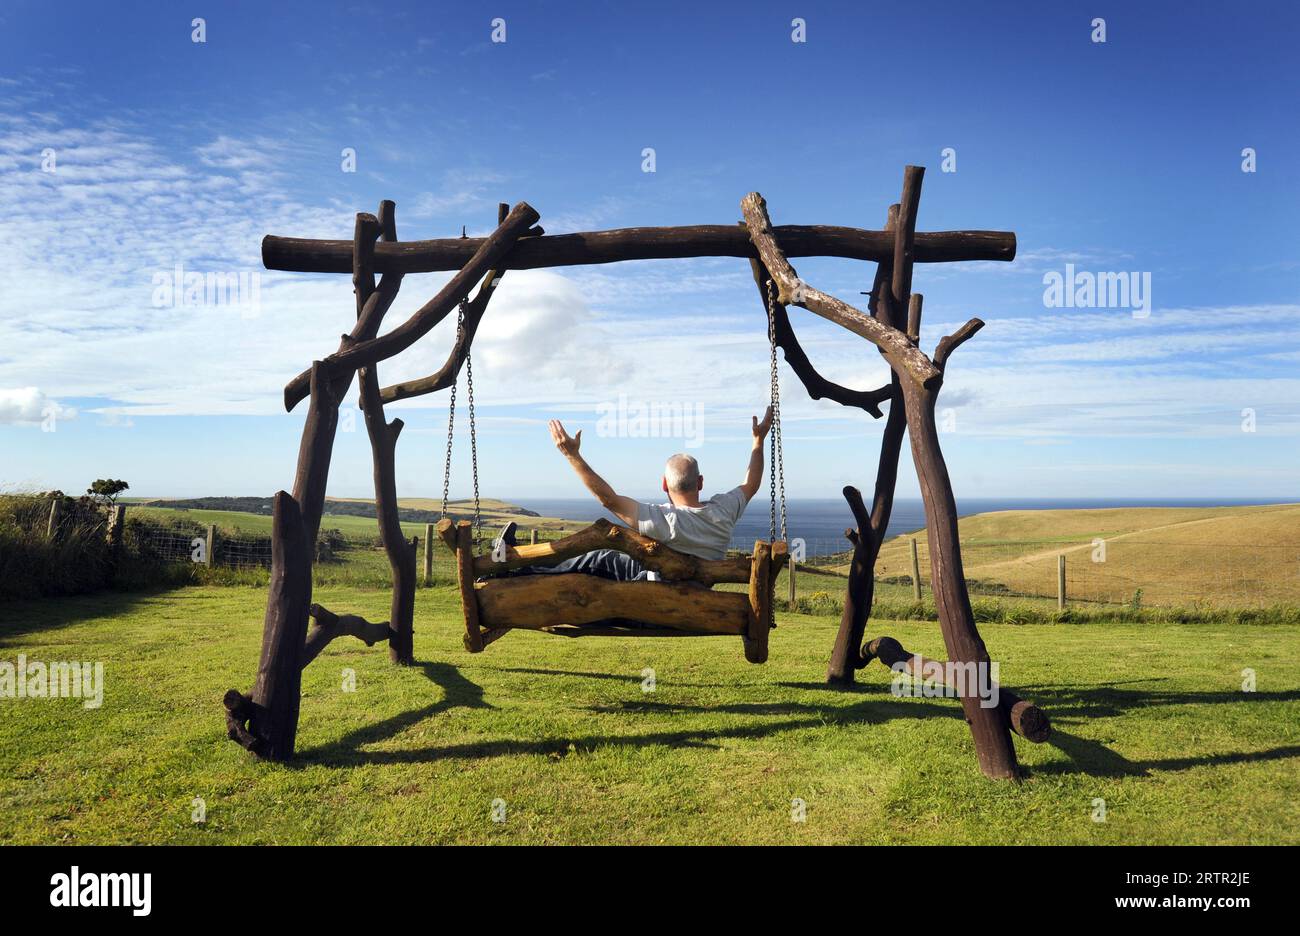 MAN ON GARDEN SWING BENCH WITH SEA VIEW RE RETIREMENT MENTAL HEALTH COUNTRYSIDE RETIRING ETC UK Stock Photo